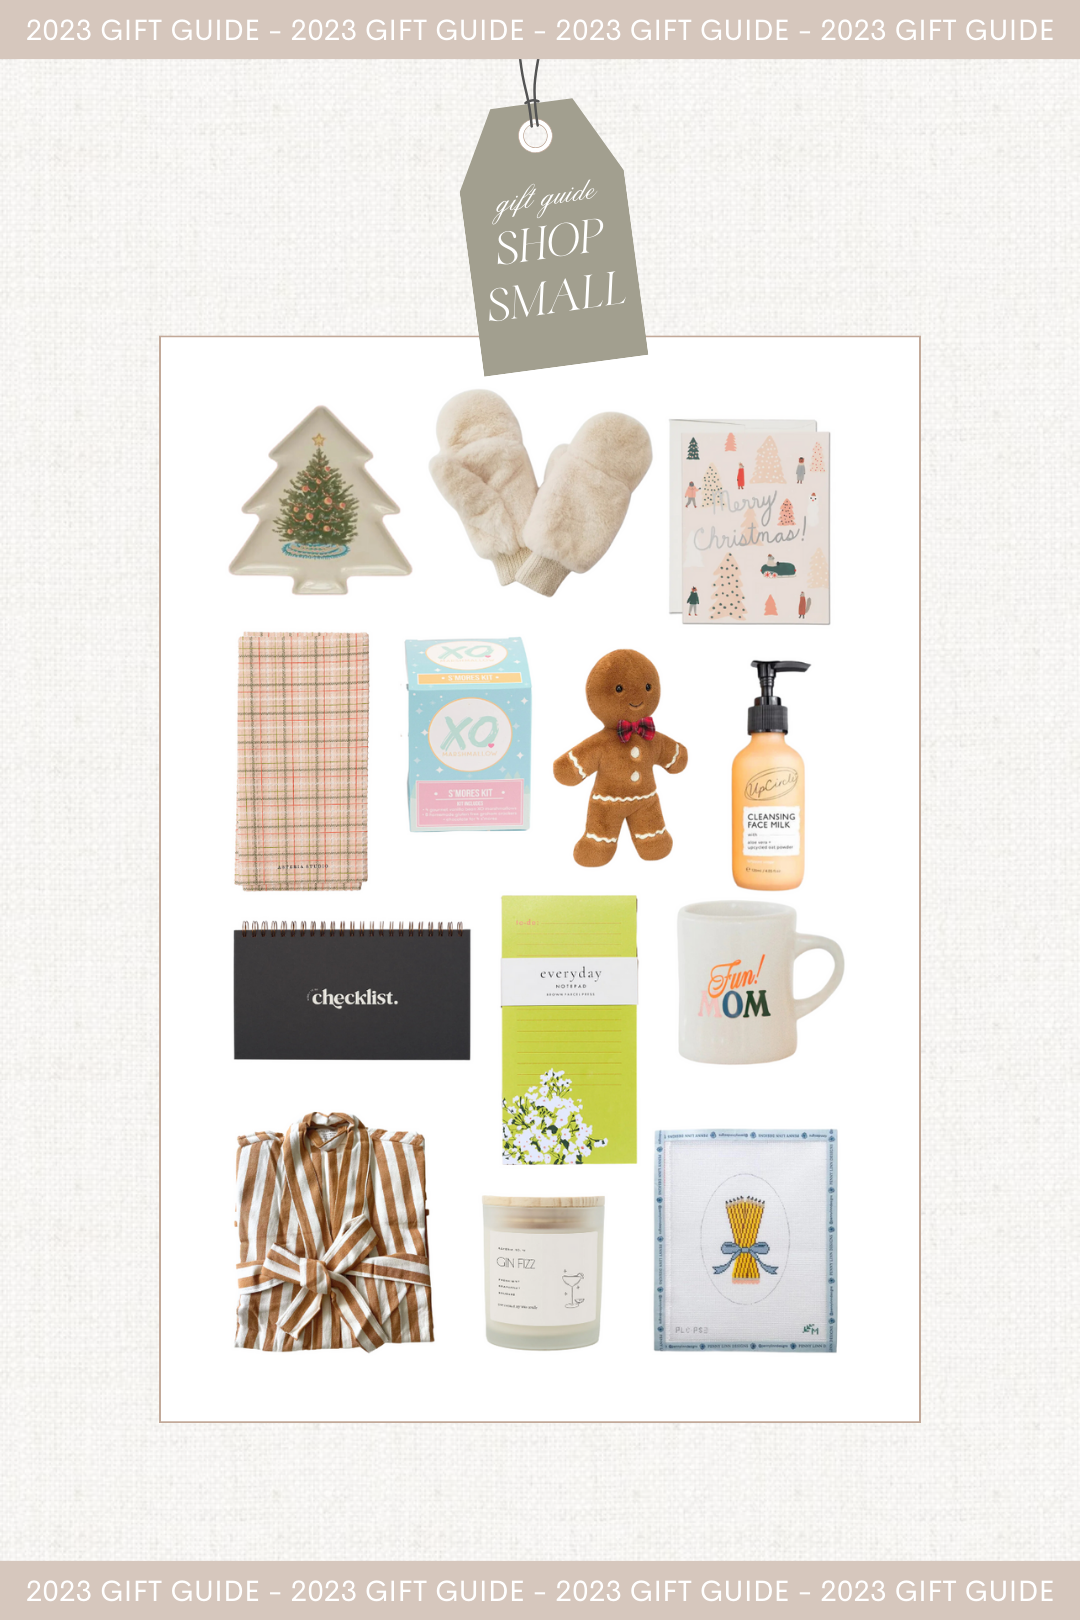 Small Business Gift Ideas (30+ Ideas to Shop Small This Christmas!)